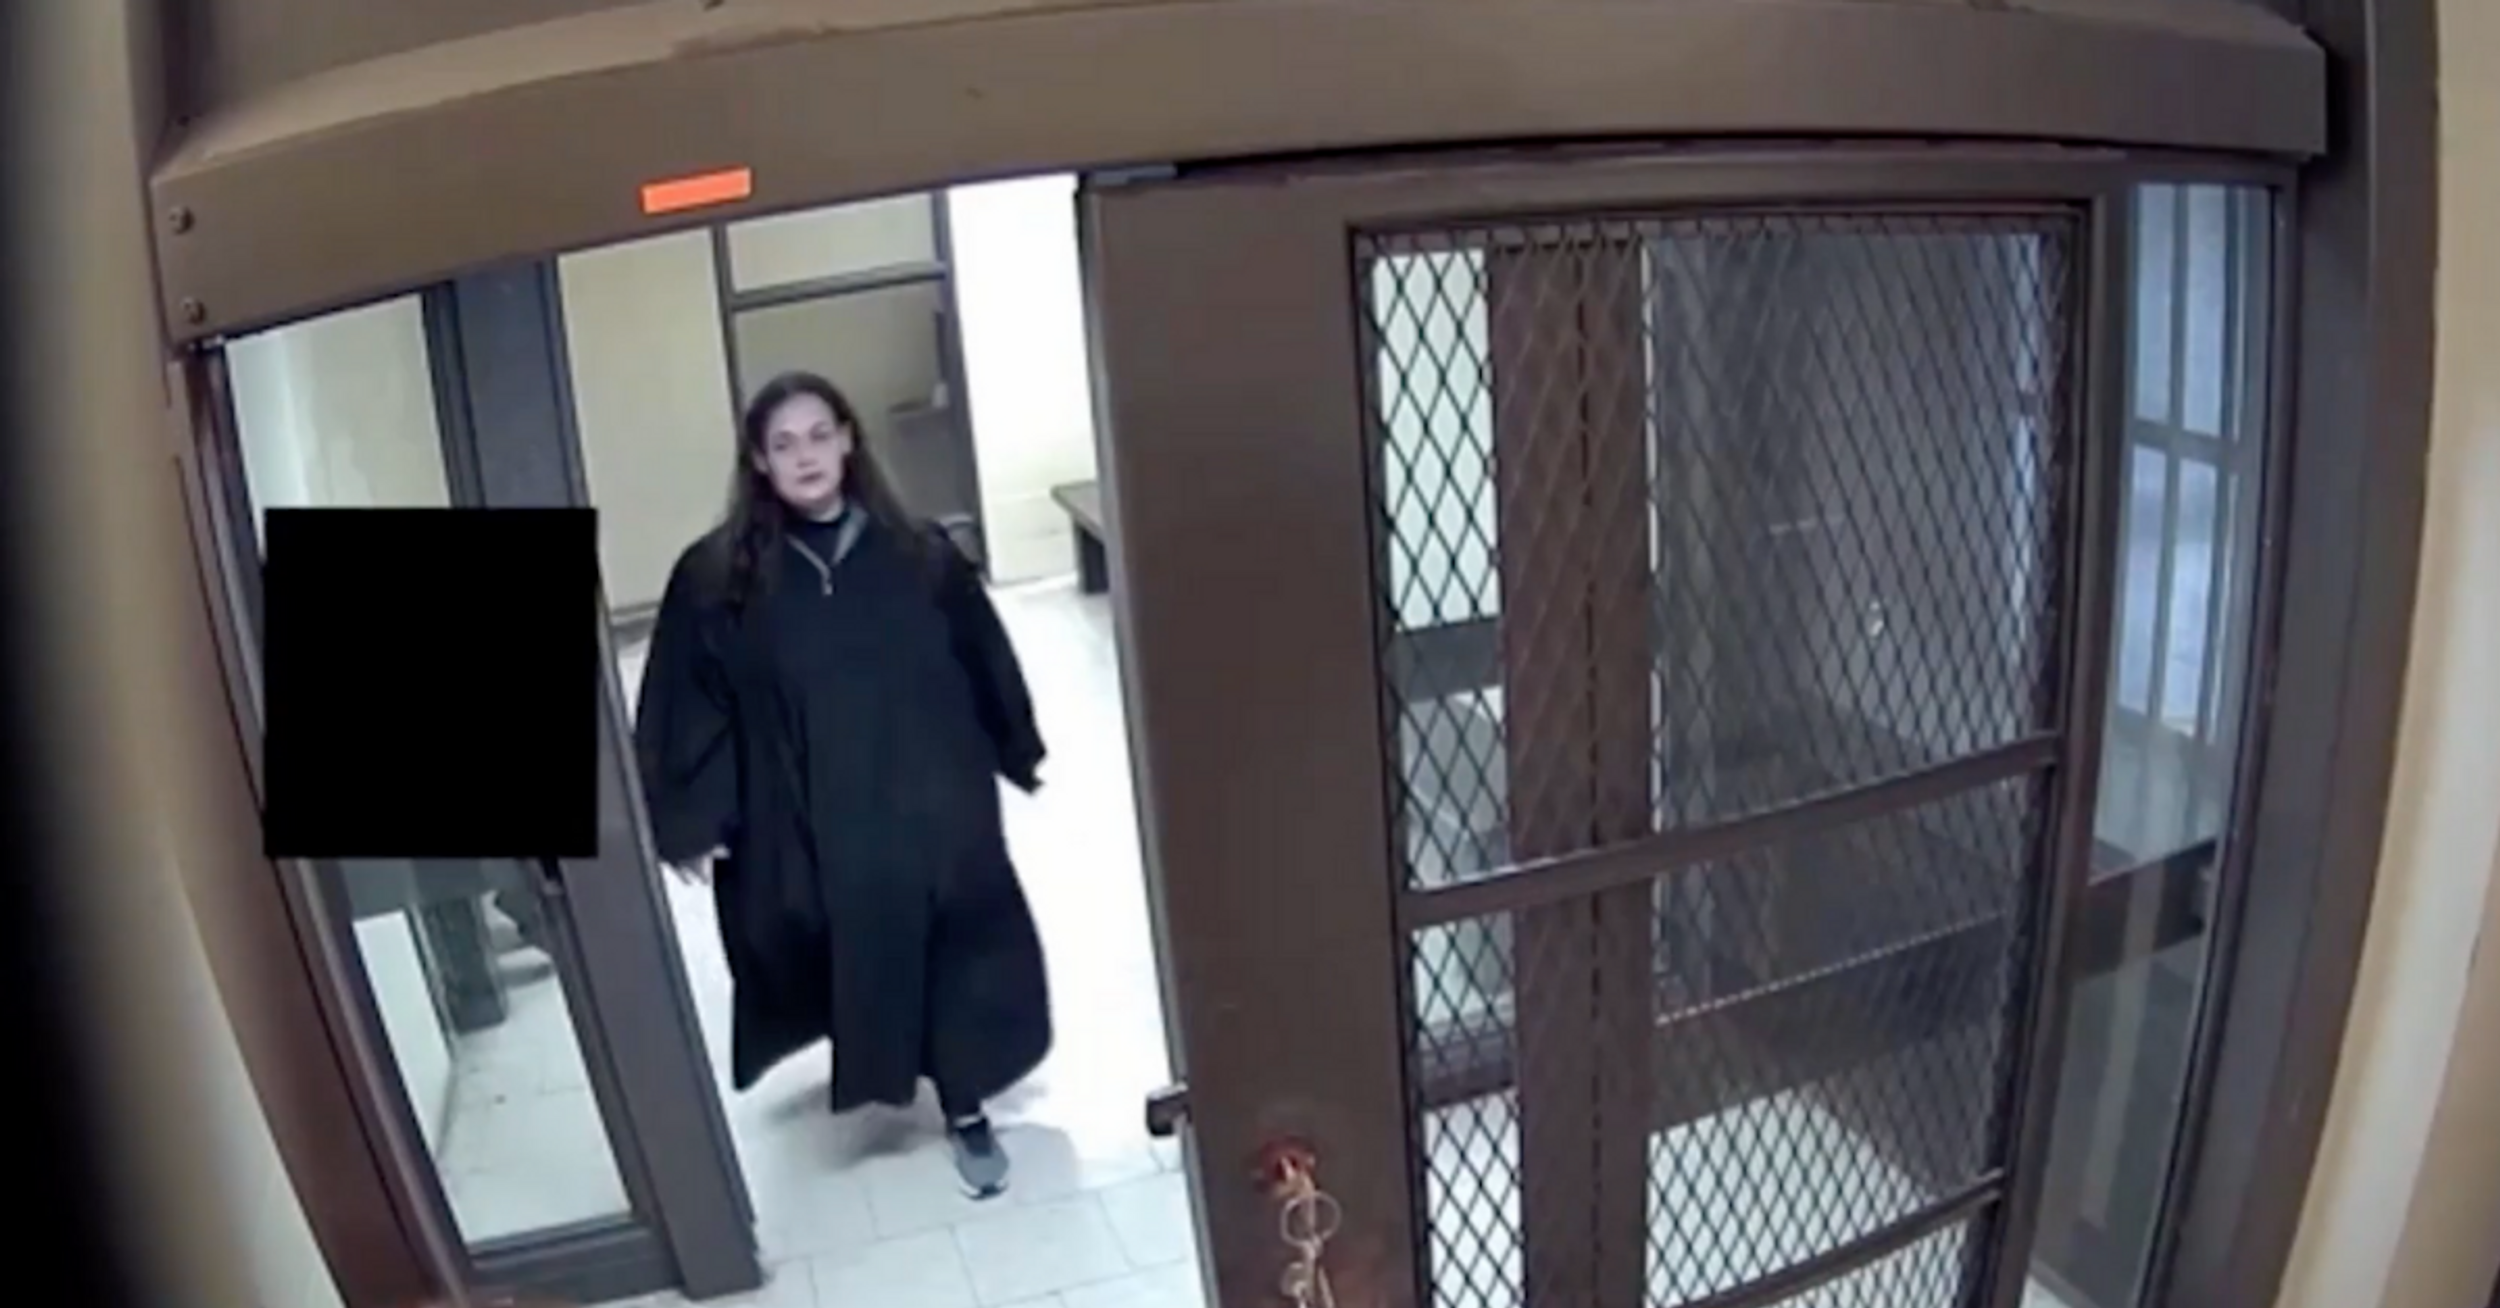 Illinois Judge Reassigned Indefinitely After Video Emerges Of Her Locking Up Young Girl In A Courtroom Holding Cell